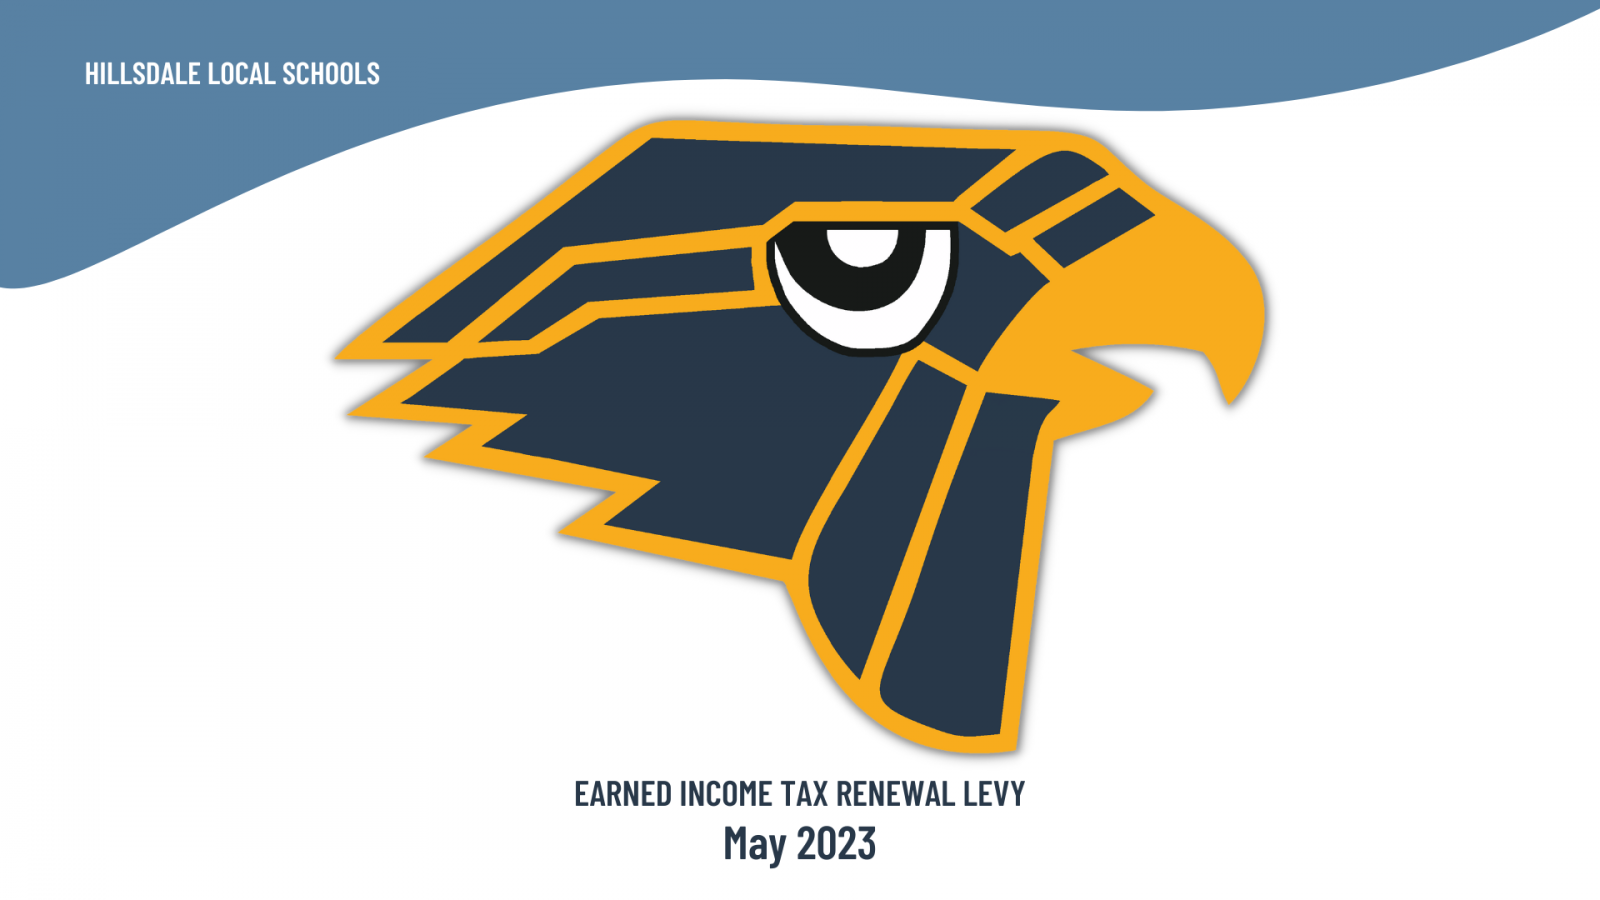 An image of the district logo with the text Earned Income Tax Renewal Levy May 2023.